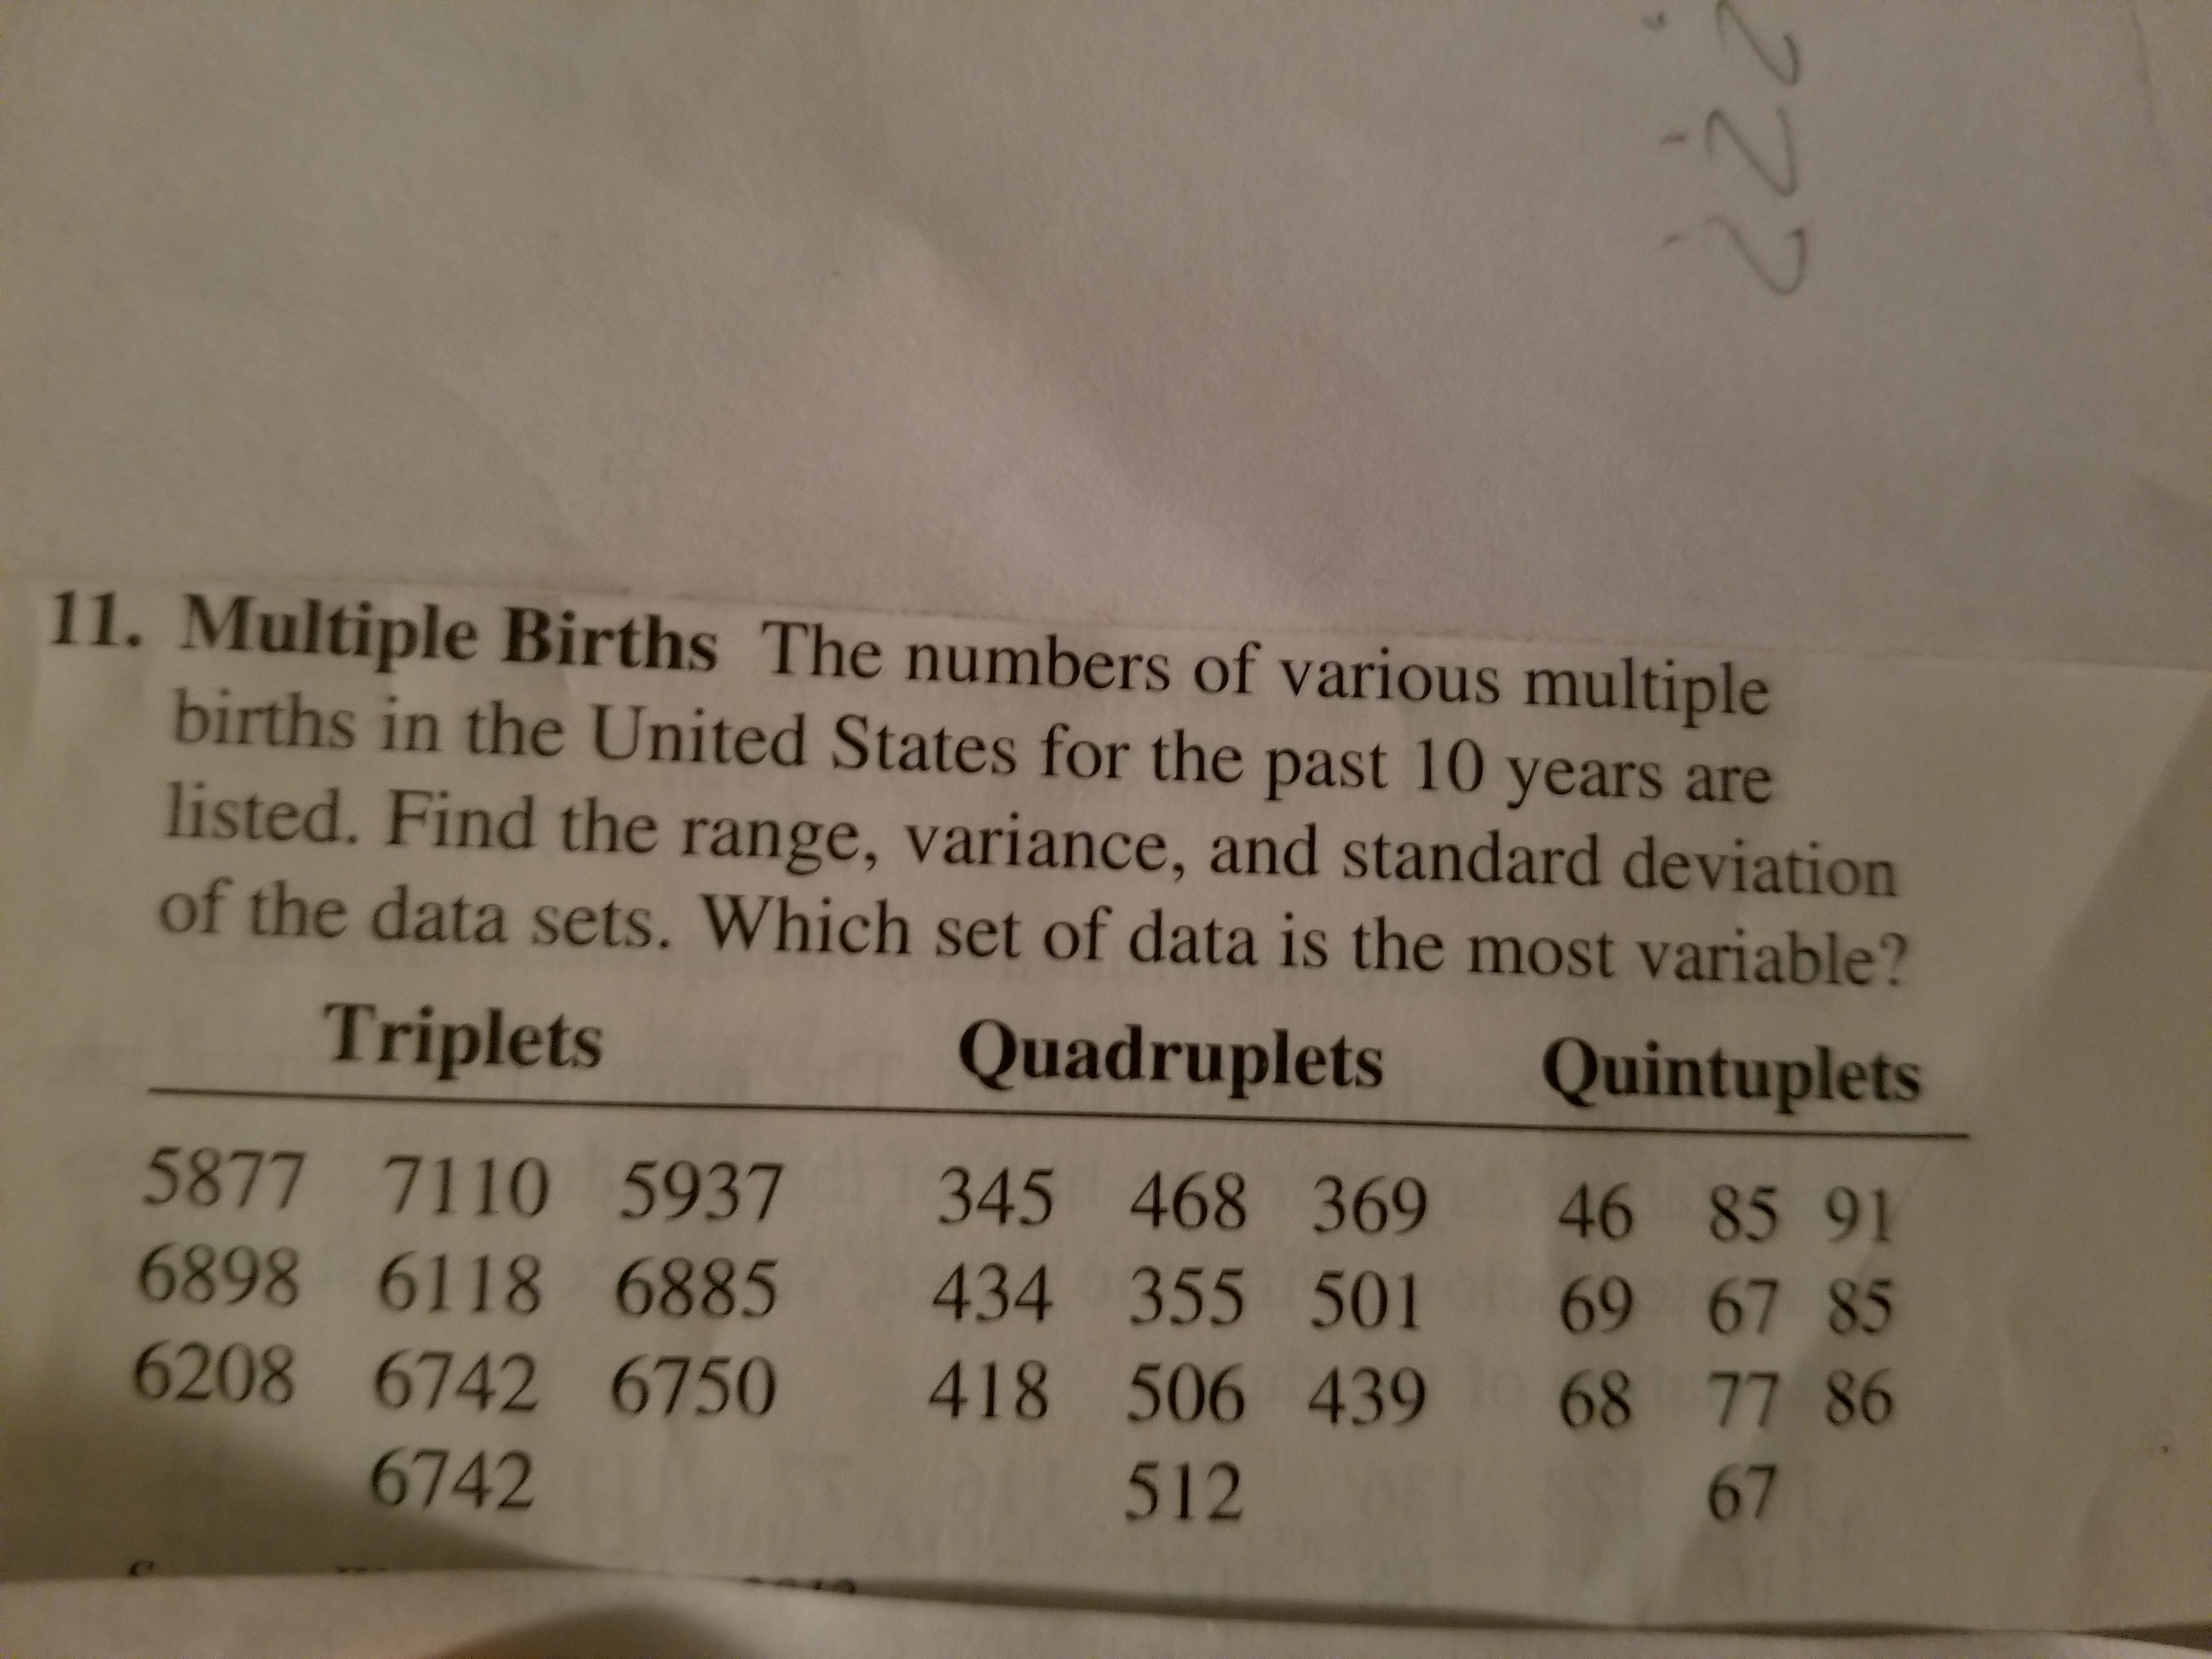 11. Multiple Births The numbers of various multiple
births in the United States for the past 10 years are
listed. Find the range, variance, and standard deviation
of the data sets. Which set of data is the most variable?
Triplets
Quadruplets Quintuplets
5877 7110 5937 345 468 369 46 85 91
6898 6118 6885 434 355 501 69 67 85
6208 6742 6750 418 506 439 68 77 86
6742
512
67
